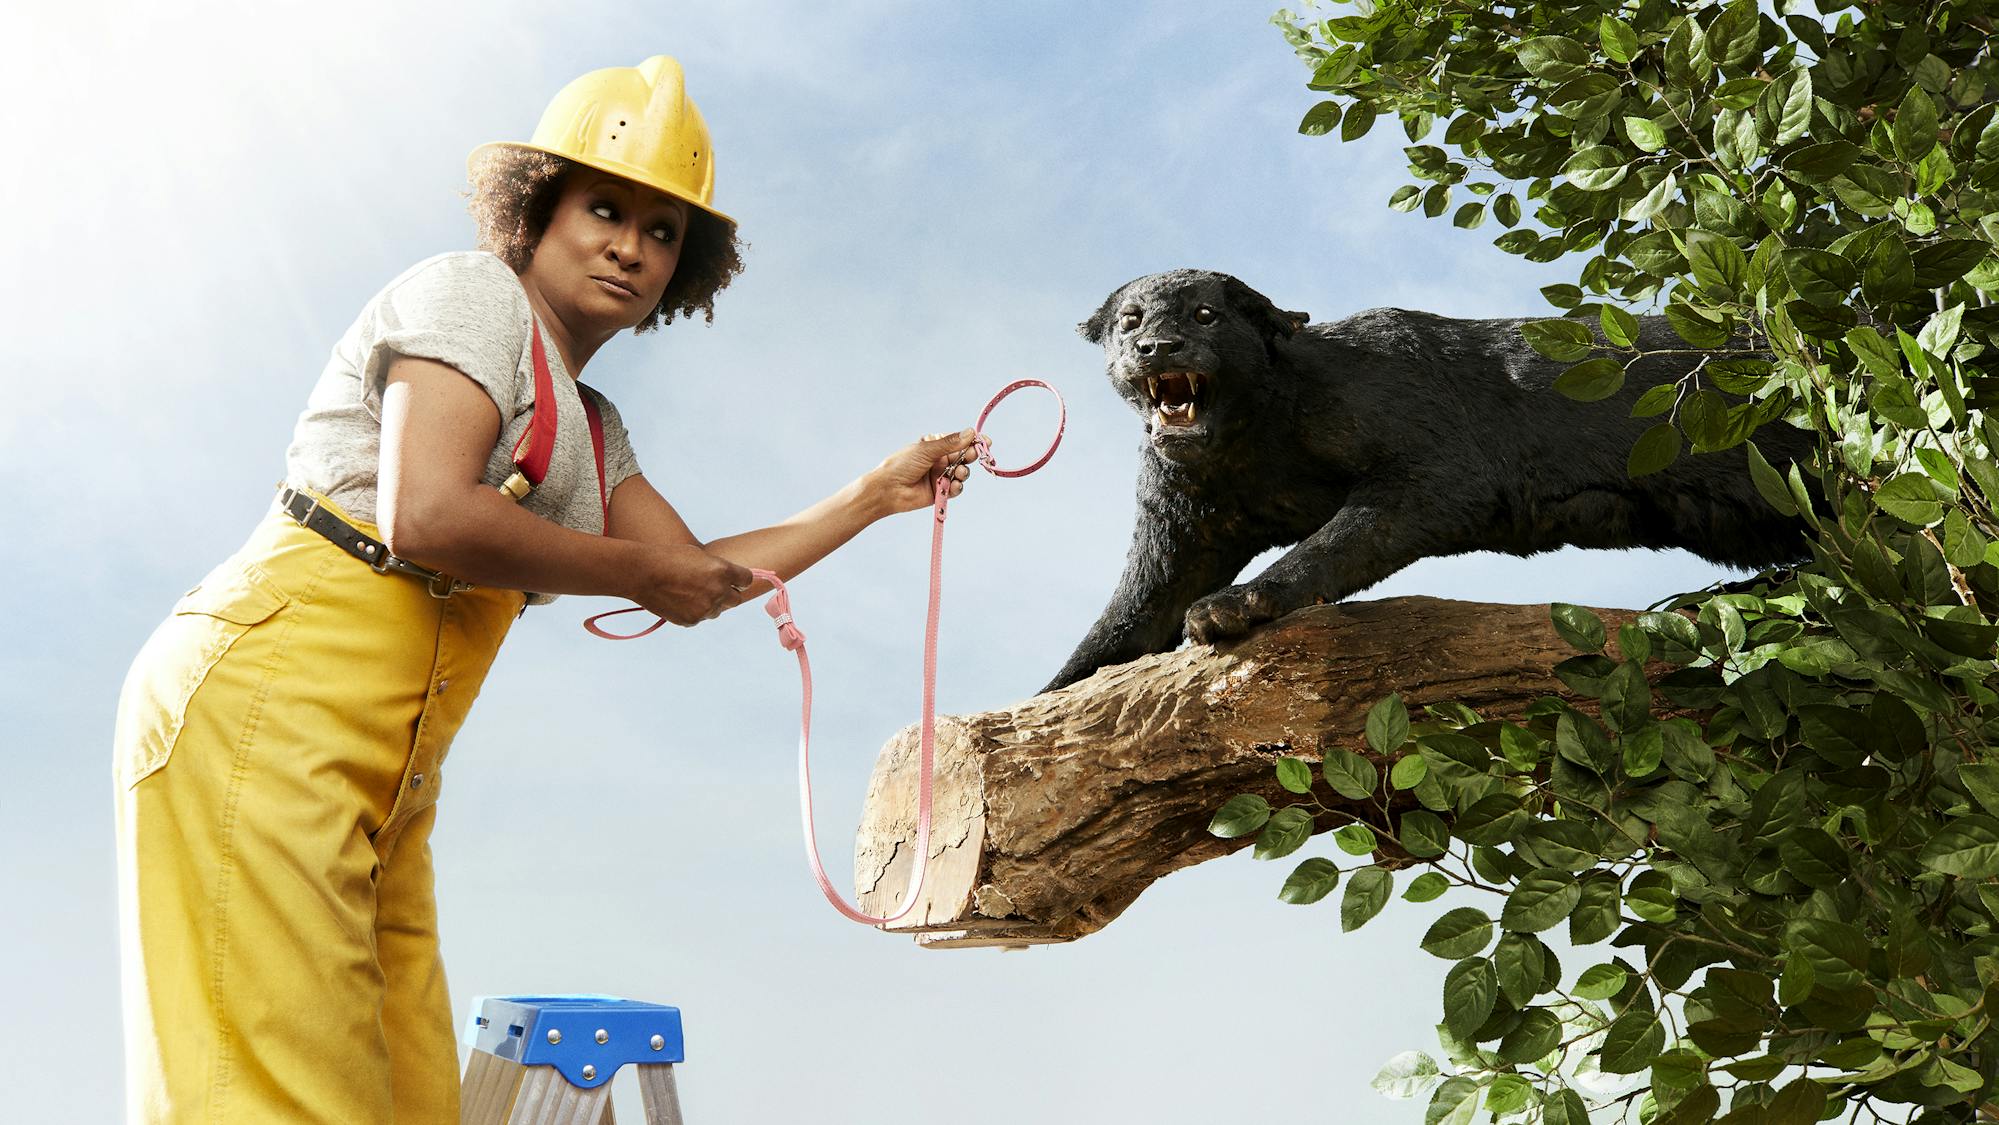 Wanda Sykes wears a yellow hard hat and yellow pants and holds a leash out to a taxidermied creatures.